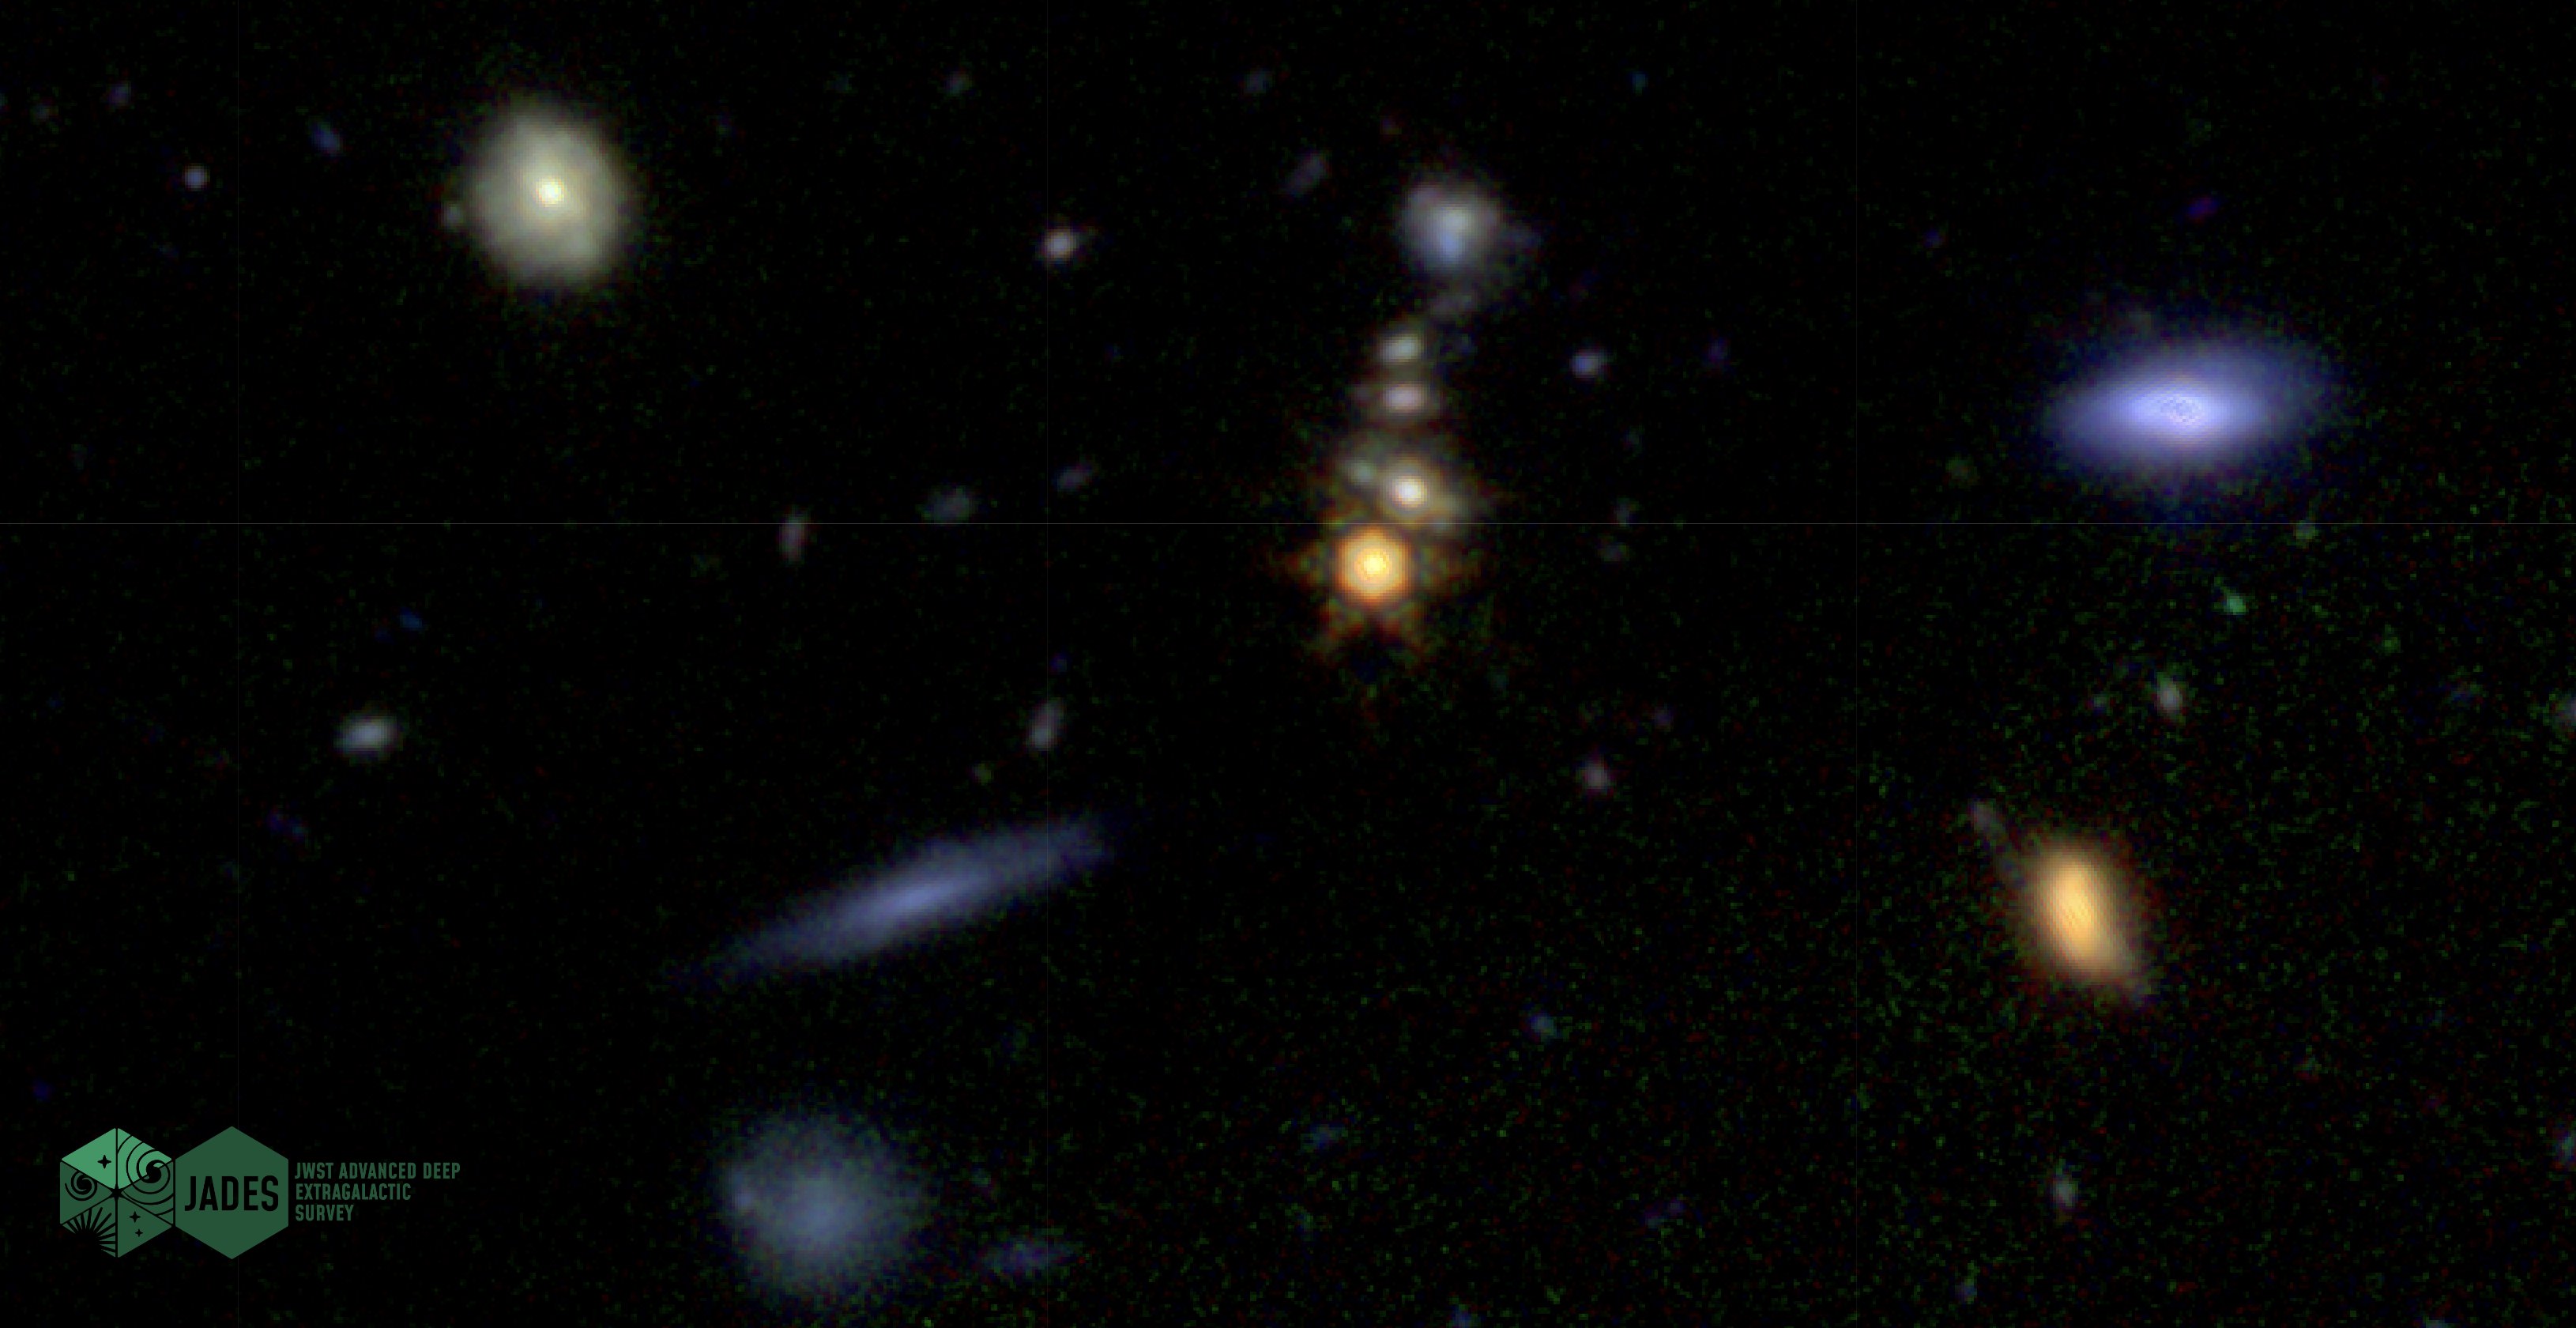 The JWST captures the deepest view yet of a group of galaxies in a dark night sky.